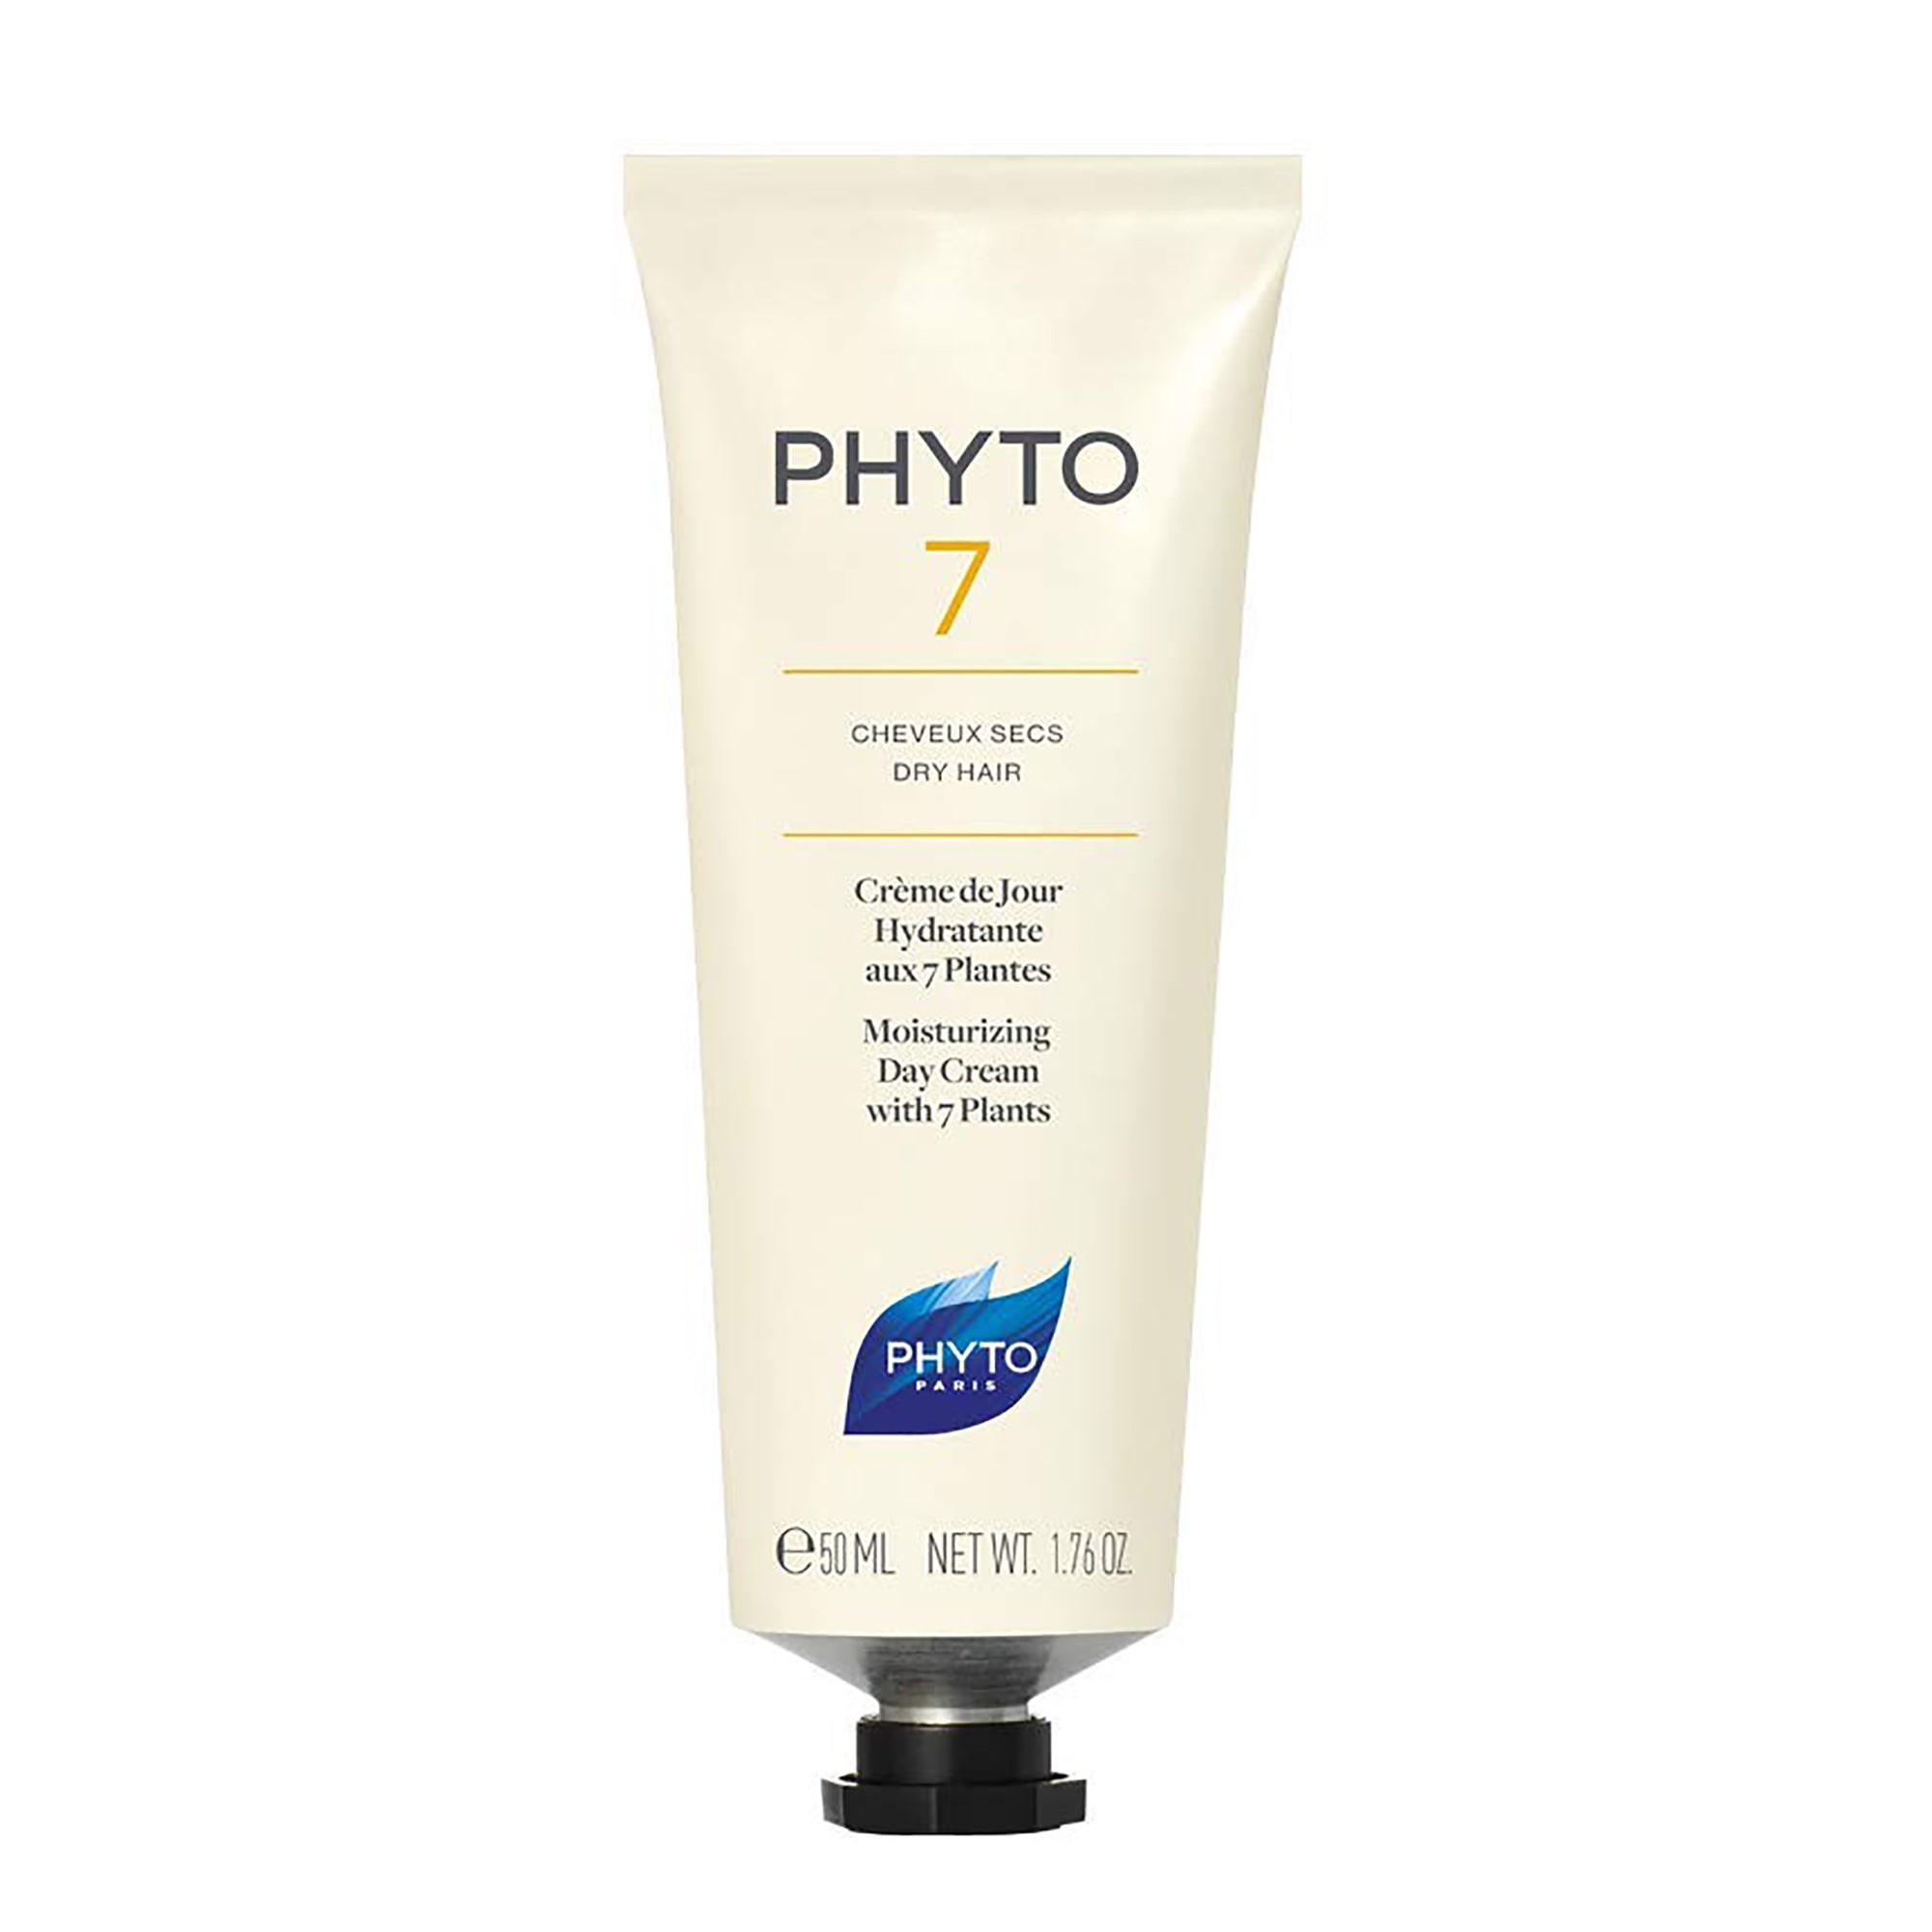 Phyto 7 Hydrating Day Cream with 7 plants / 1.7